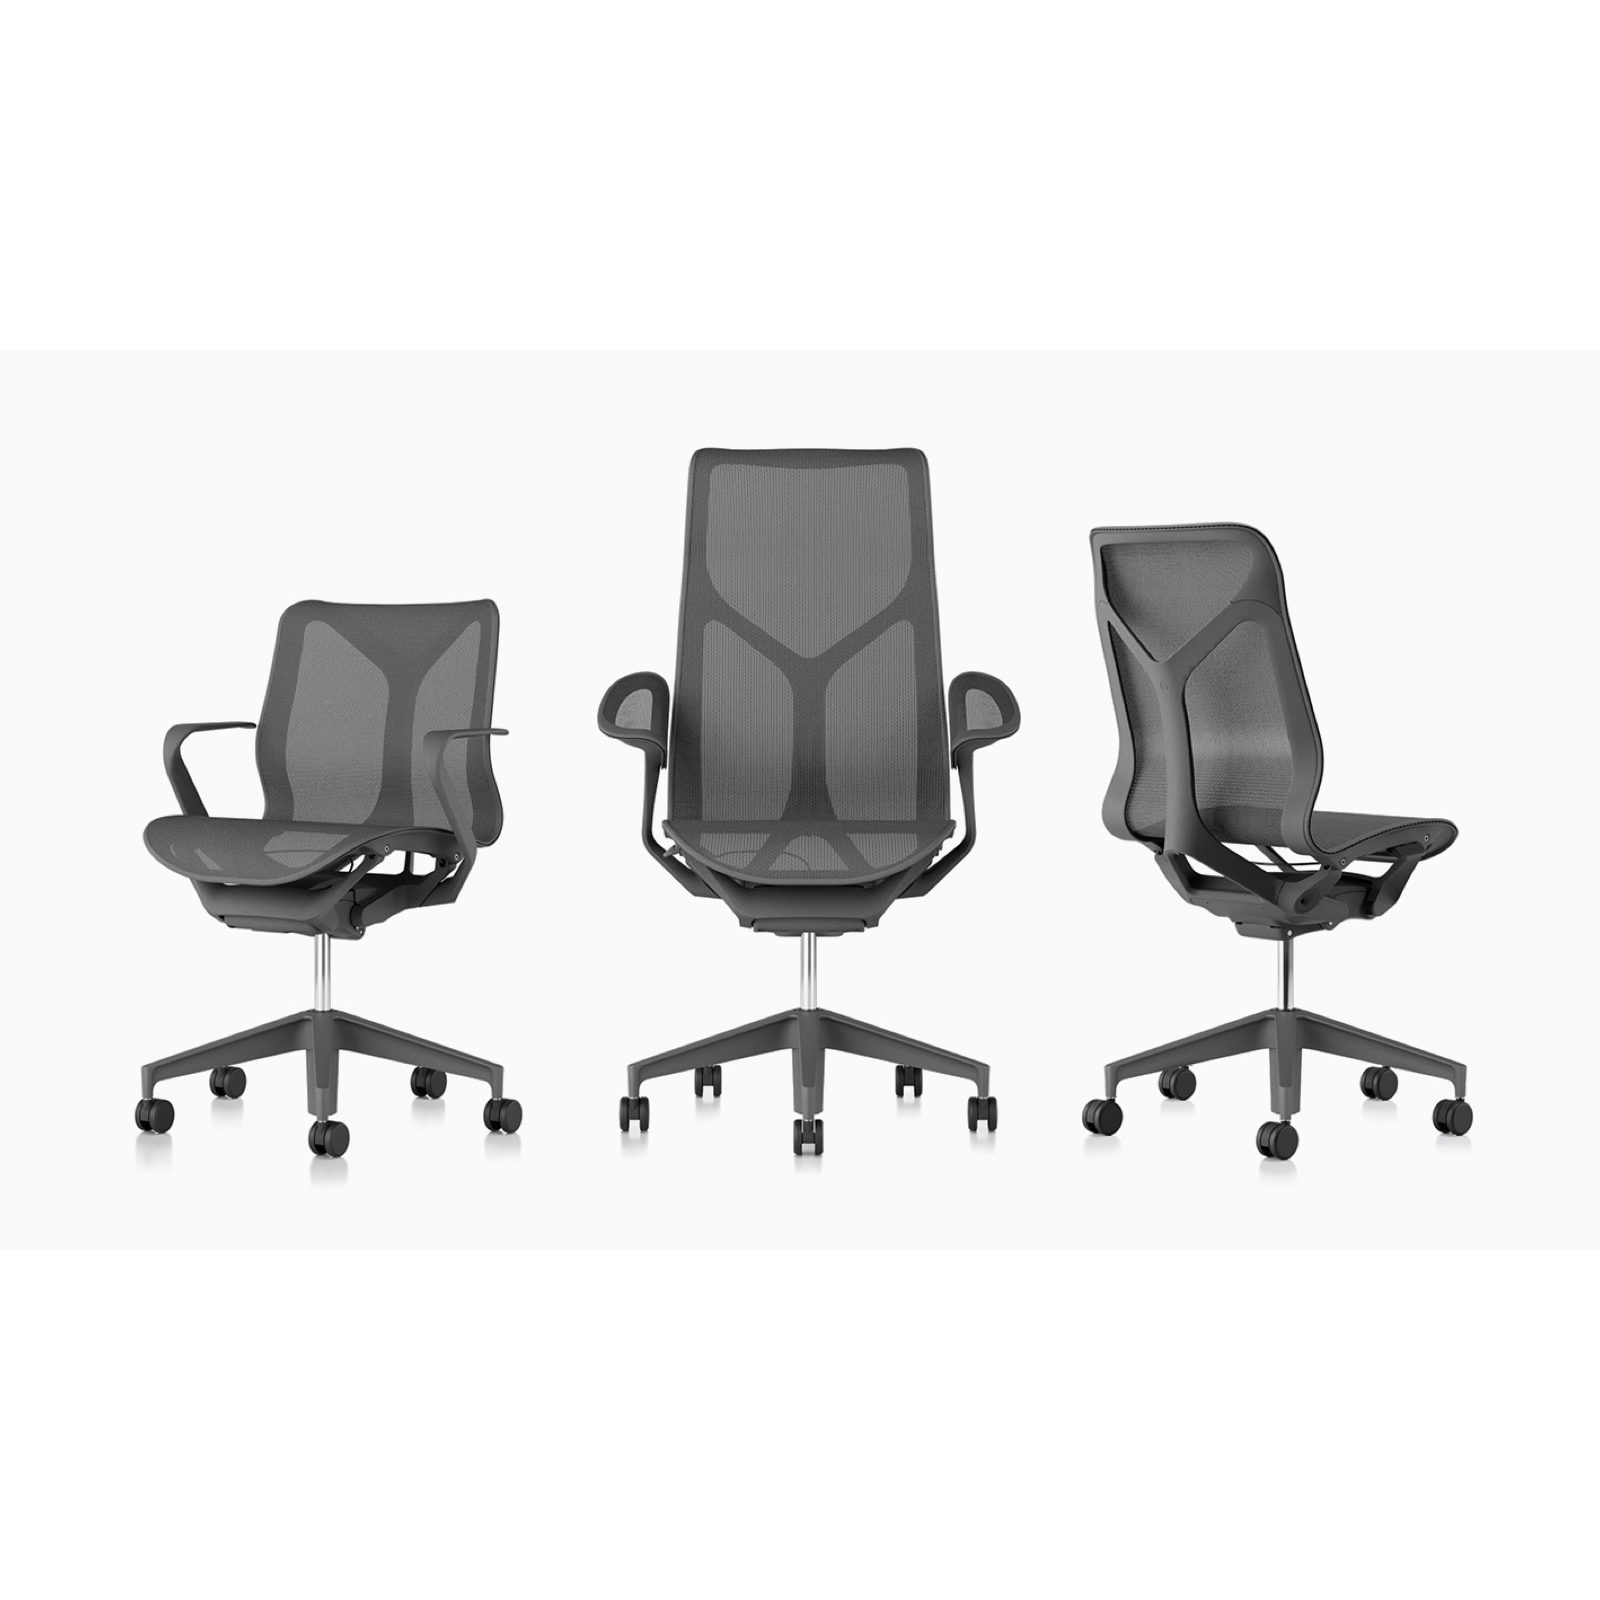 Cosm chairs carbon